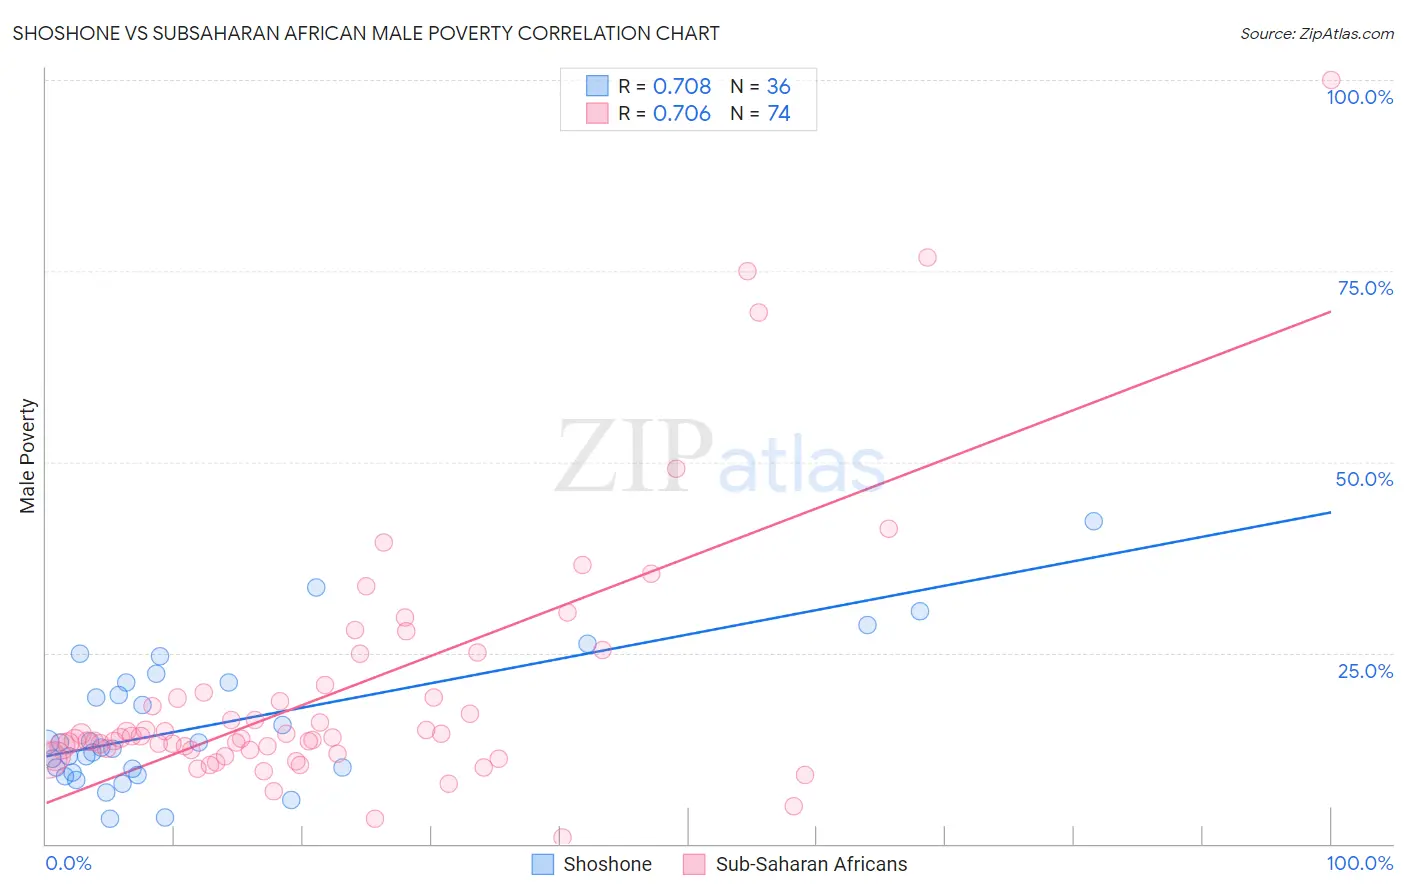 Shoshone vs Subsaharan African Male Poverty